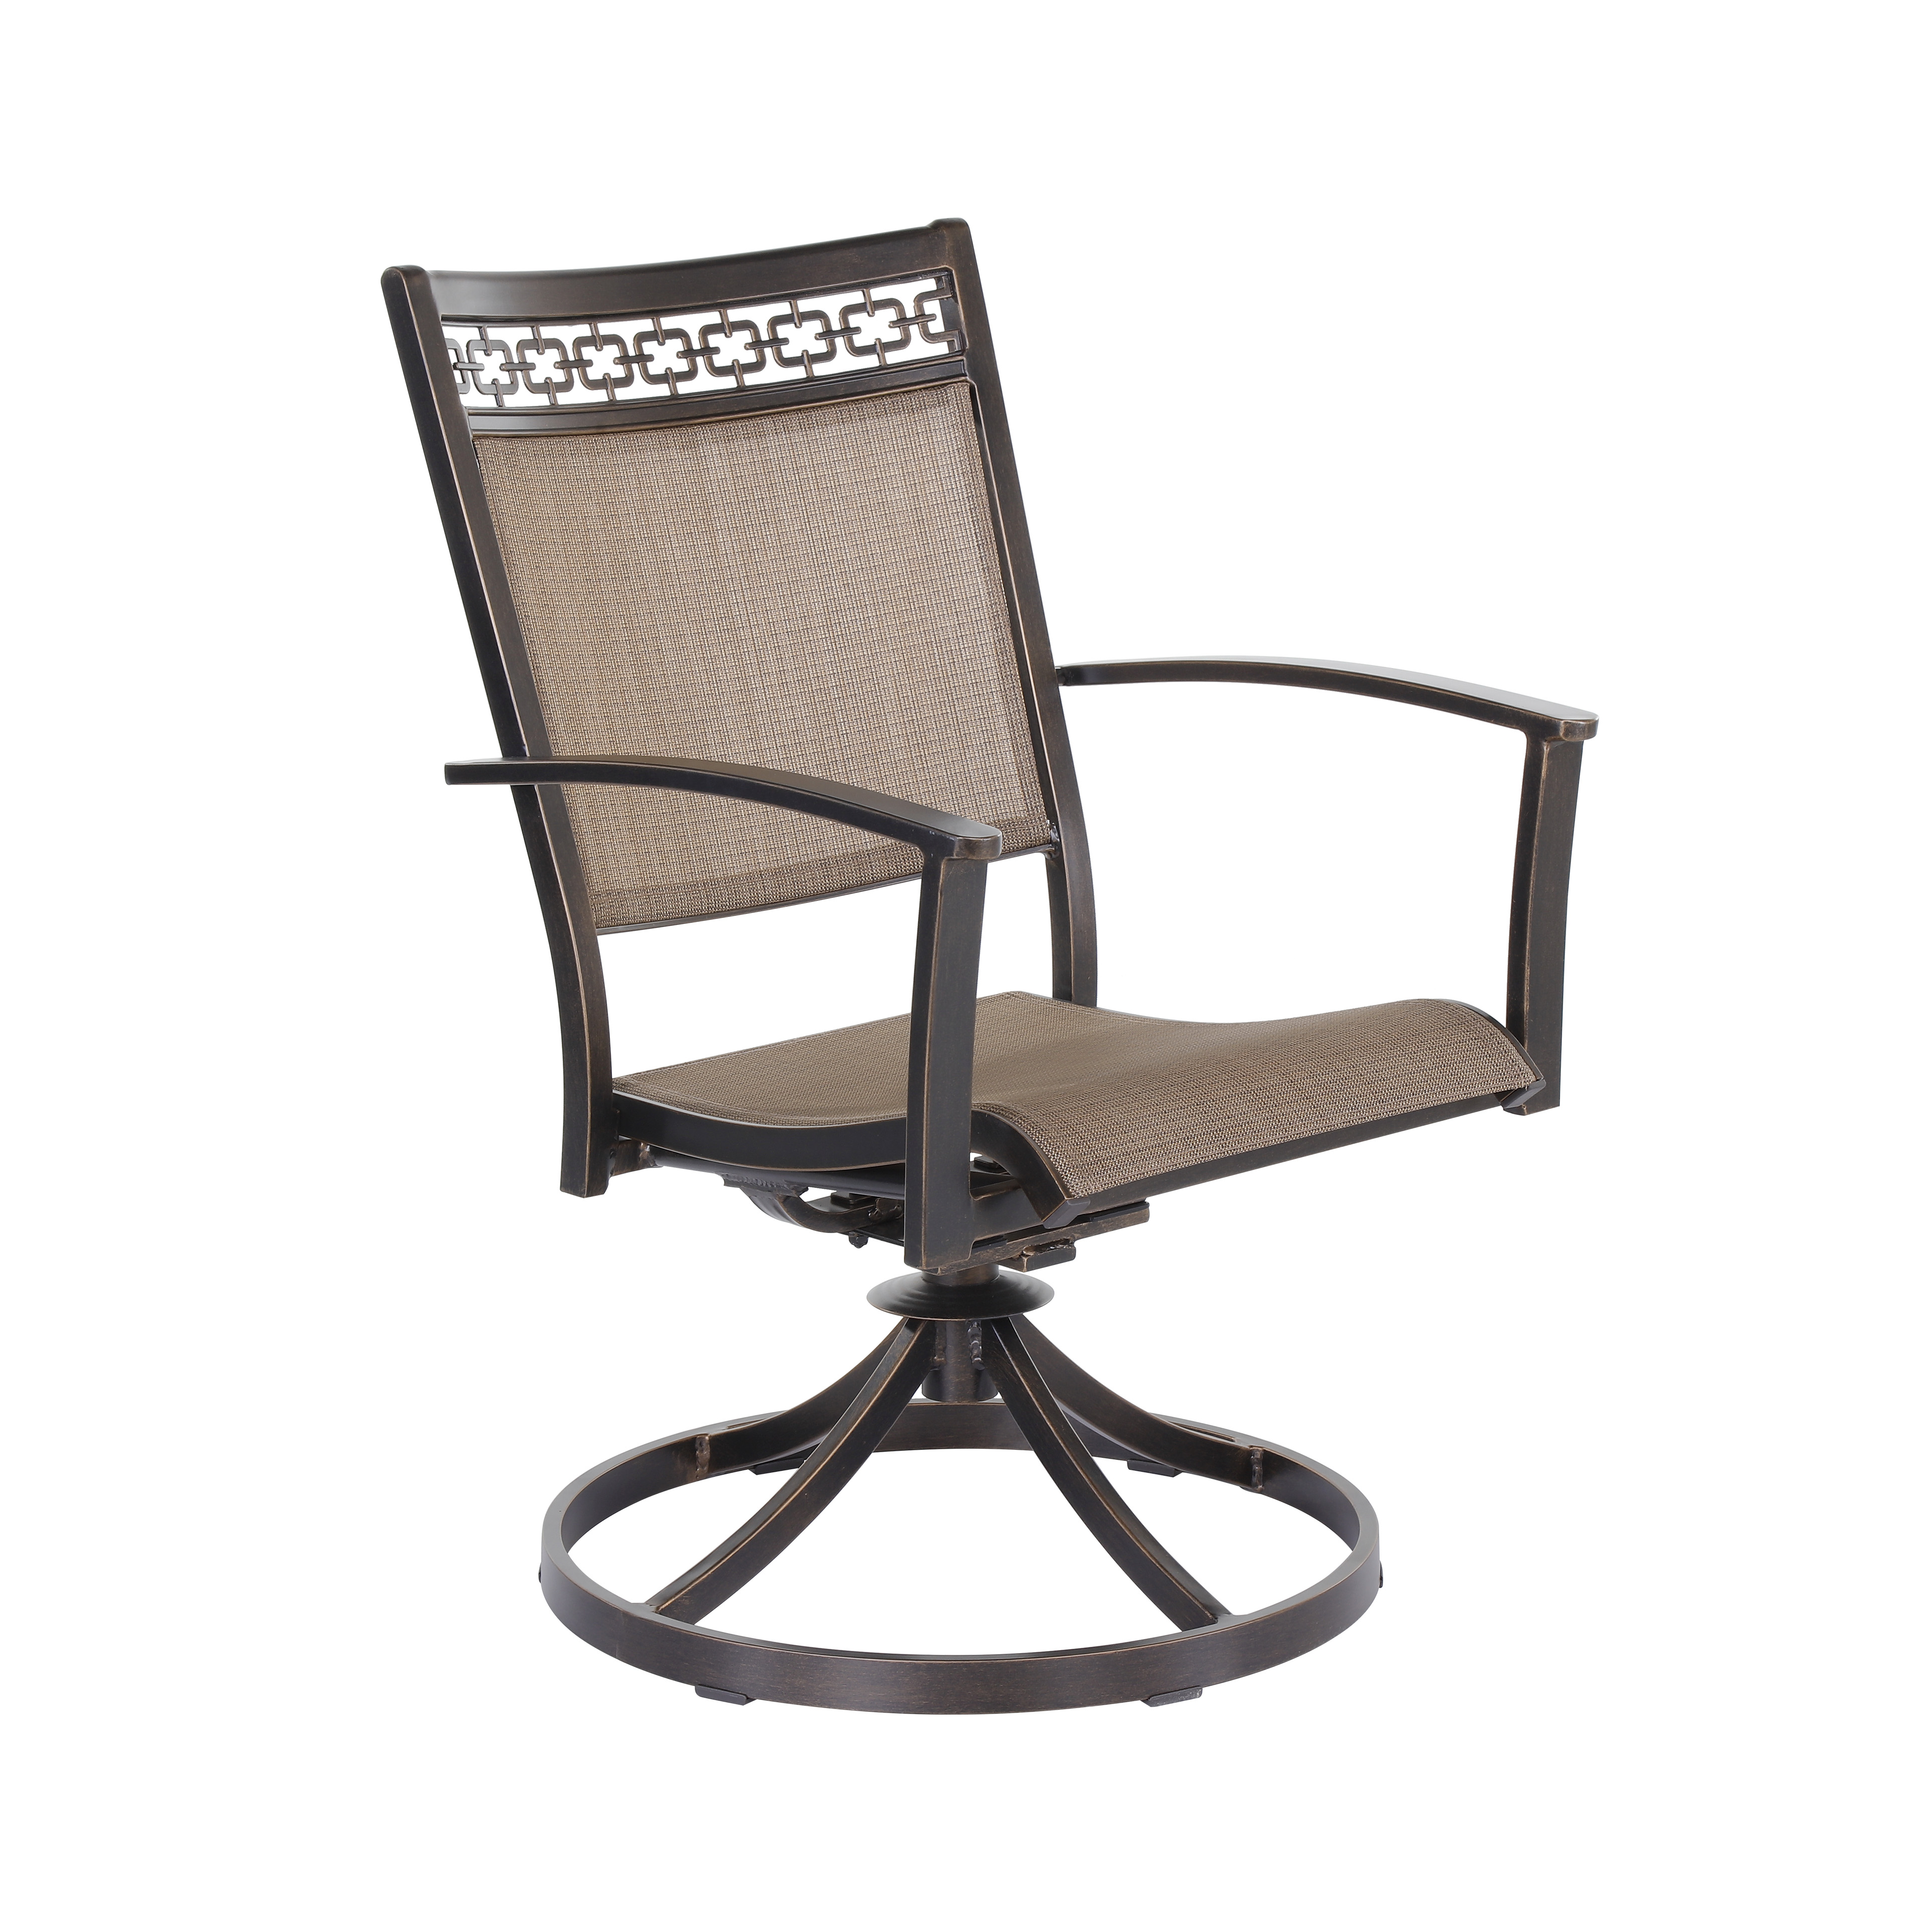 All Weather Patio Dining Chair, Sling Fabric Swivel Rocker With Rustproof Finish Aluminum Frame, Outdoor Garden Furniture 2 Pieces Sets - image 2 of 11